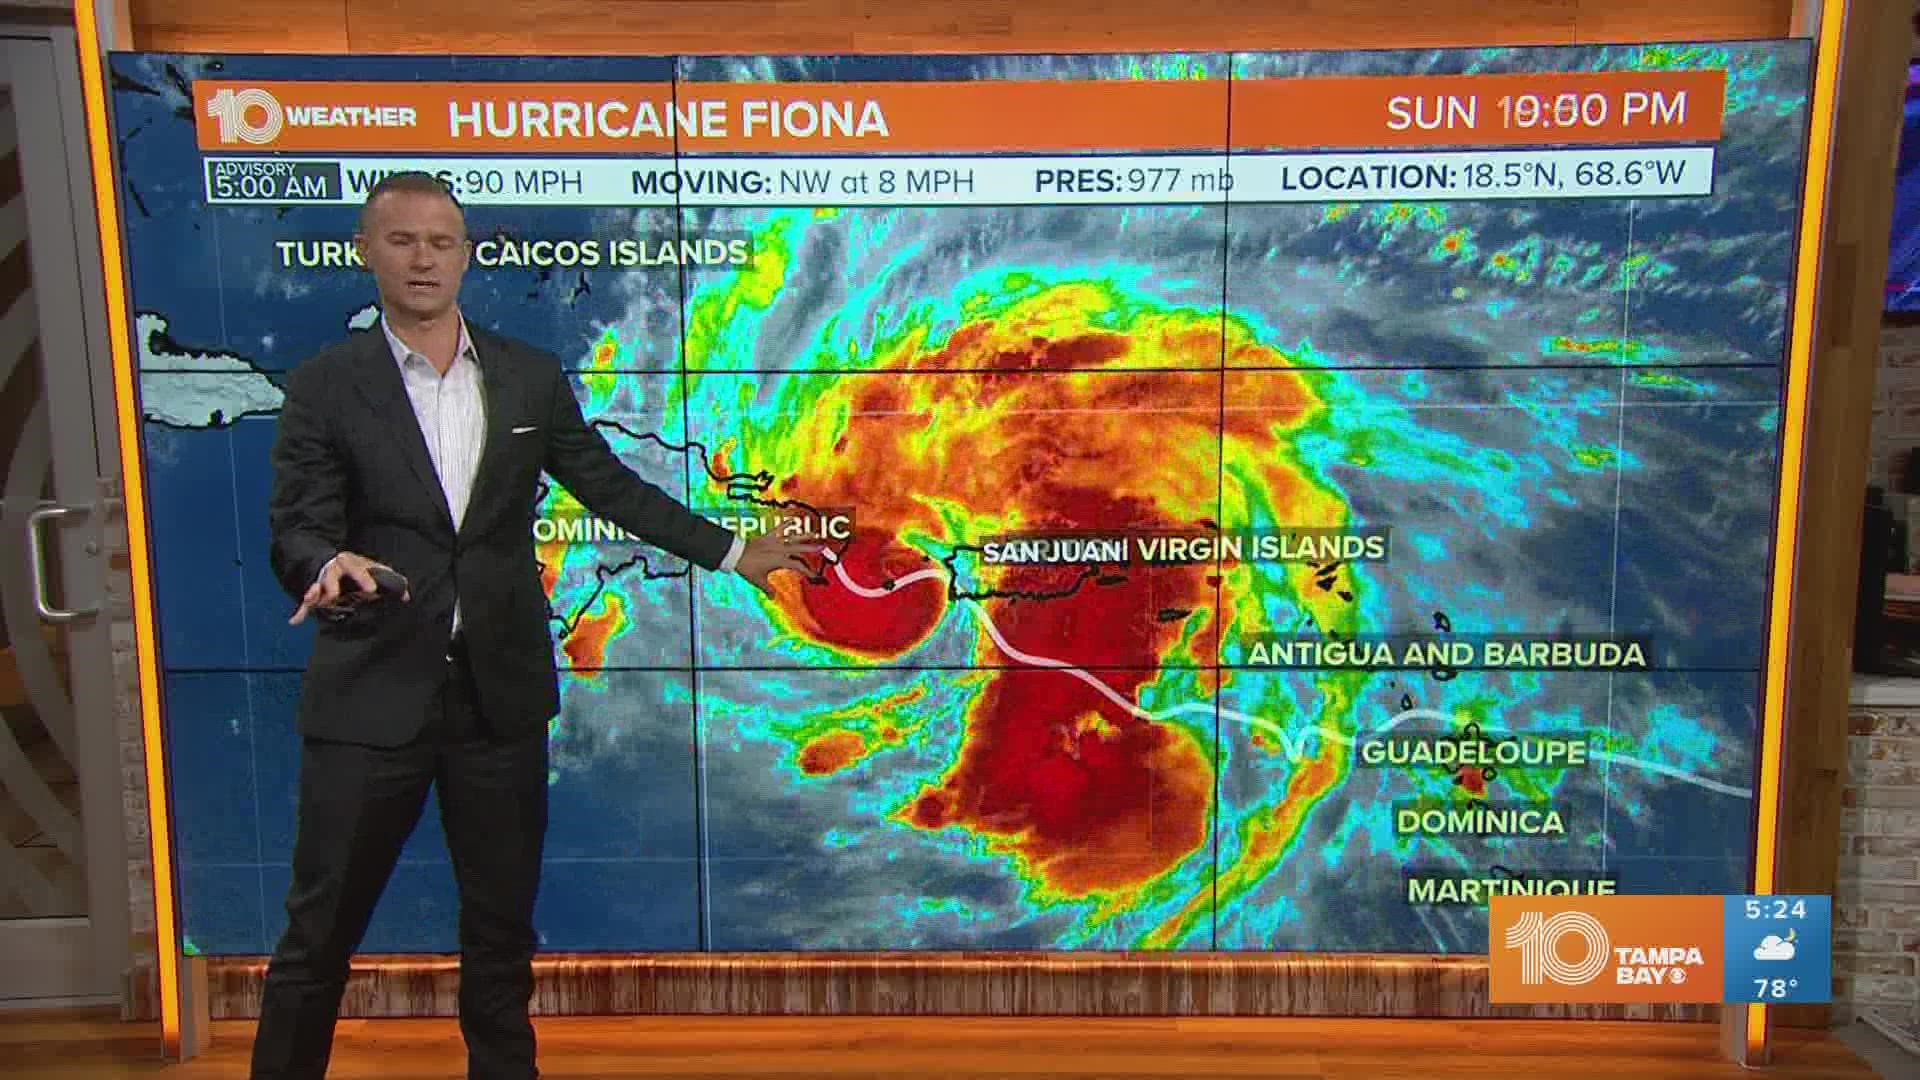 Fiona is expected to become a major hurricane as it moves away from land and turns north.